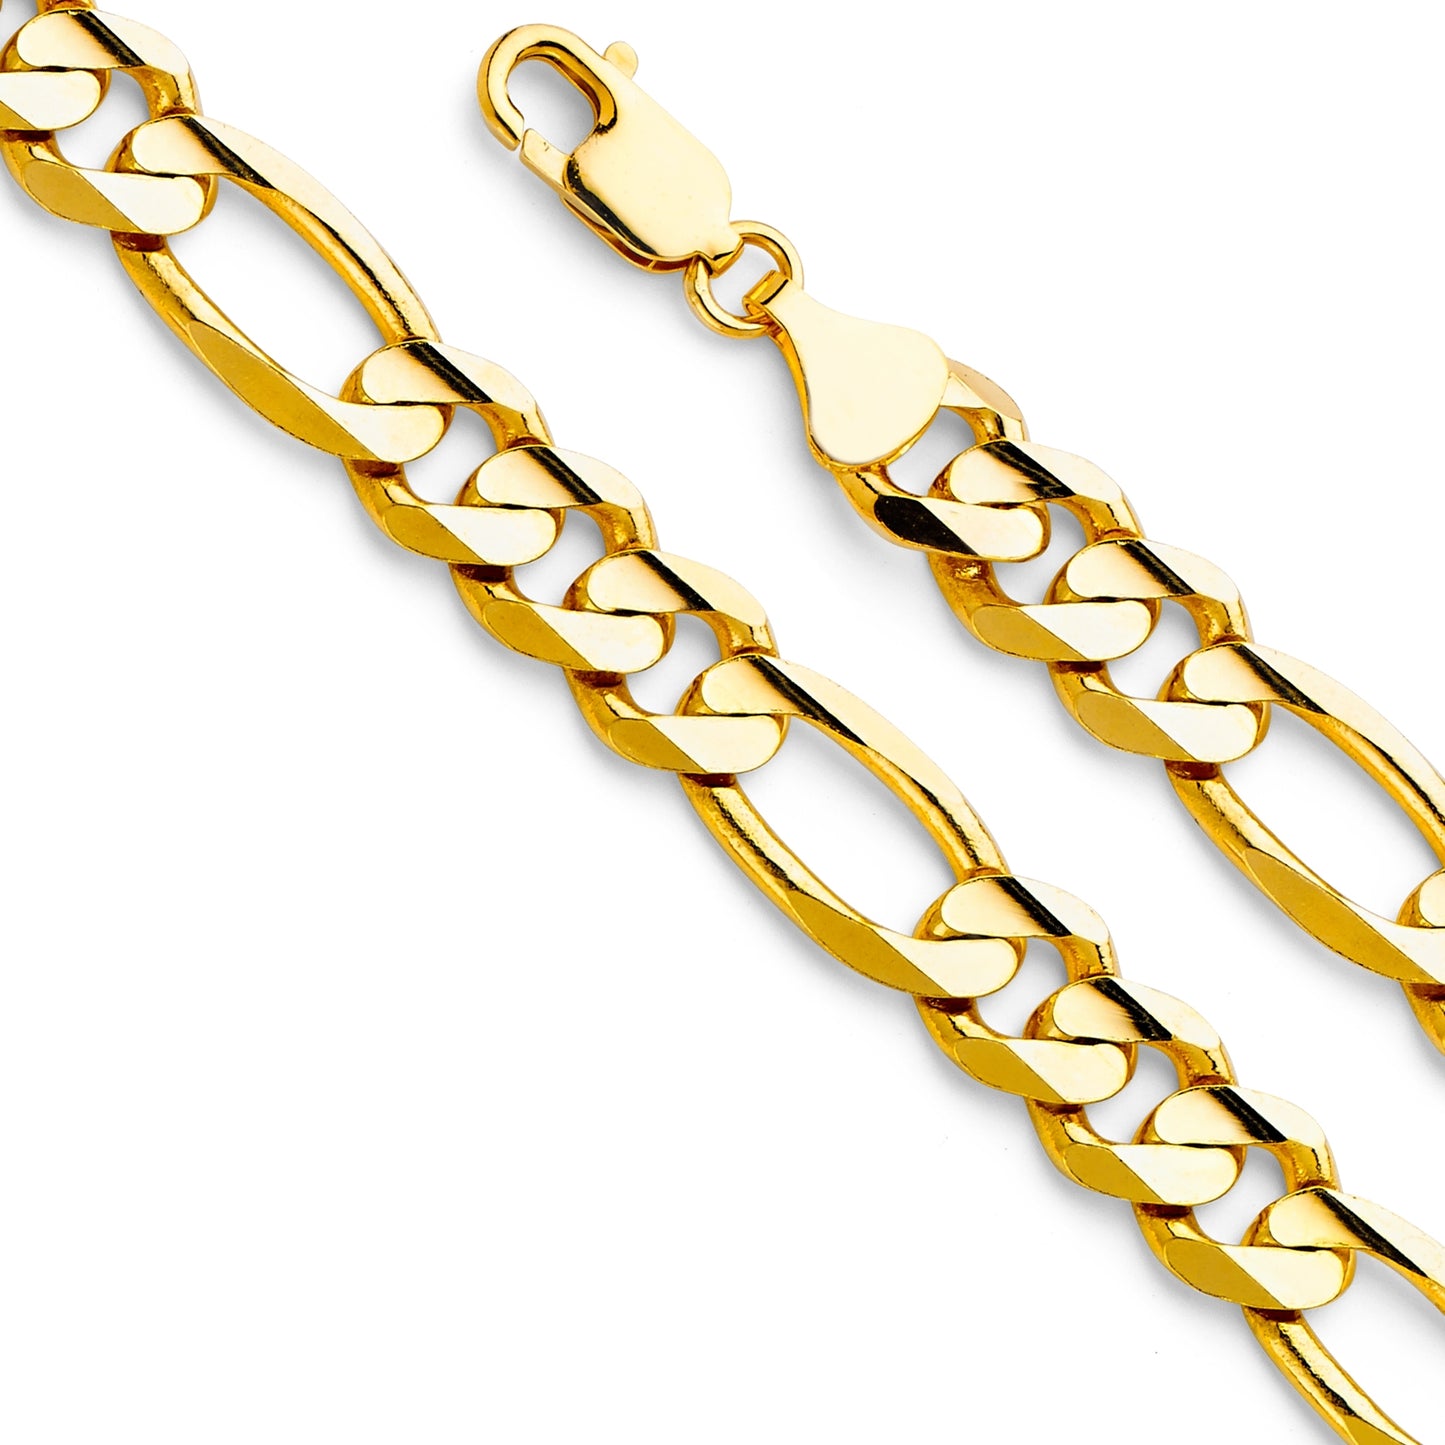 14K Solid Yellow Gold Heavy Figaro Bracelet 10.5mm thick 8.5 Inches.  Made in Italy